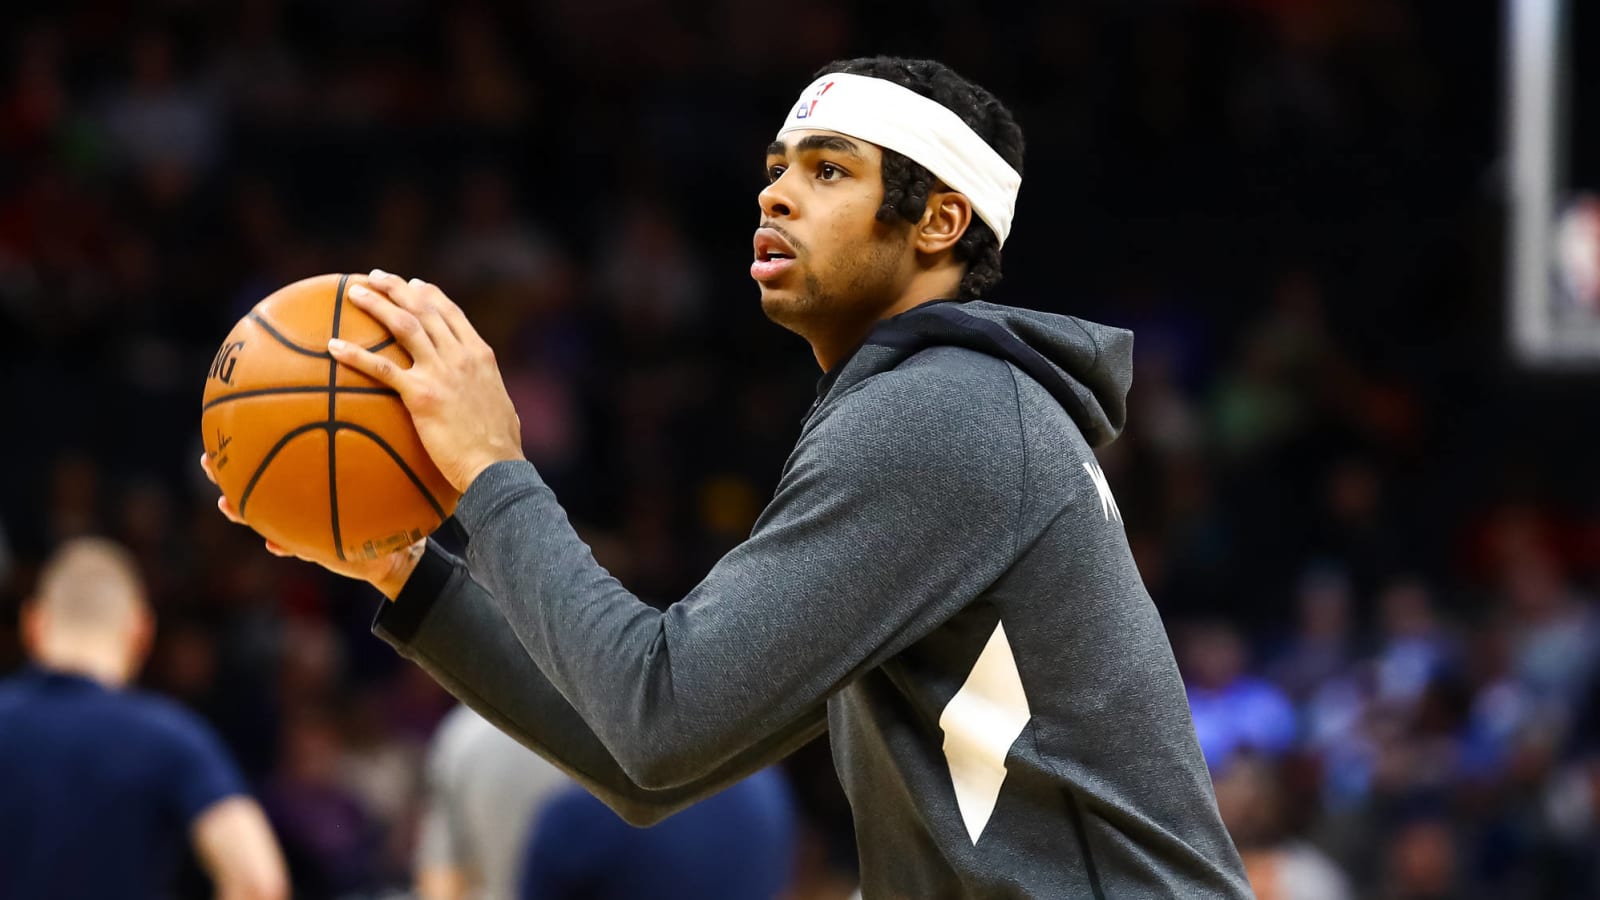 T-wolves' D’Angelo Russell out 4-6 weeks due to knee surgery